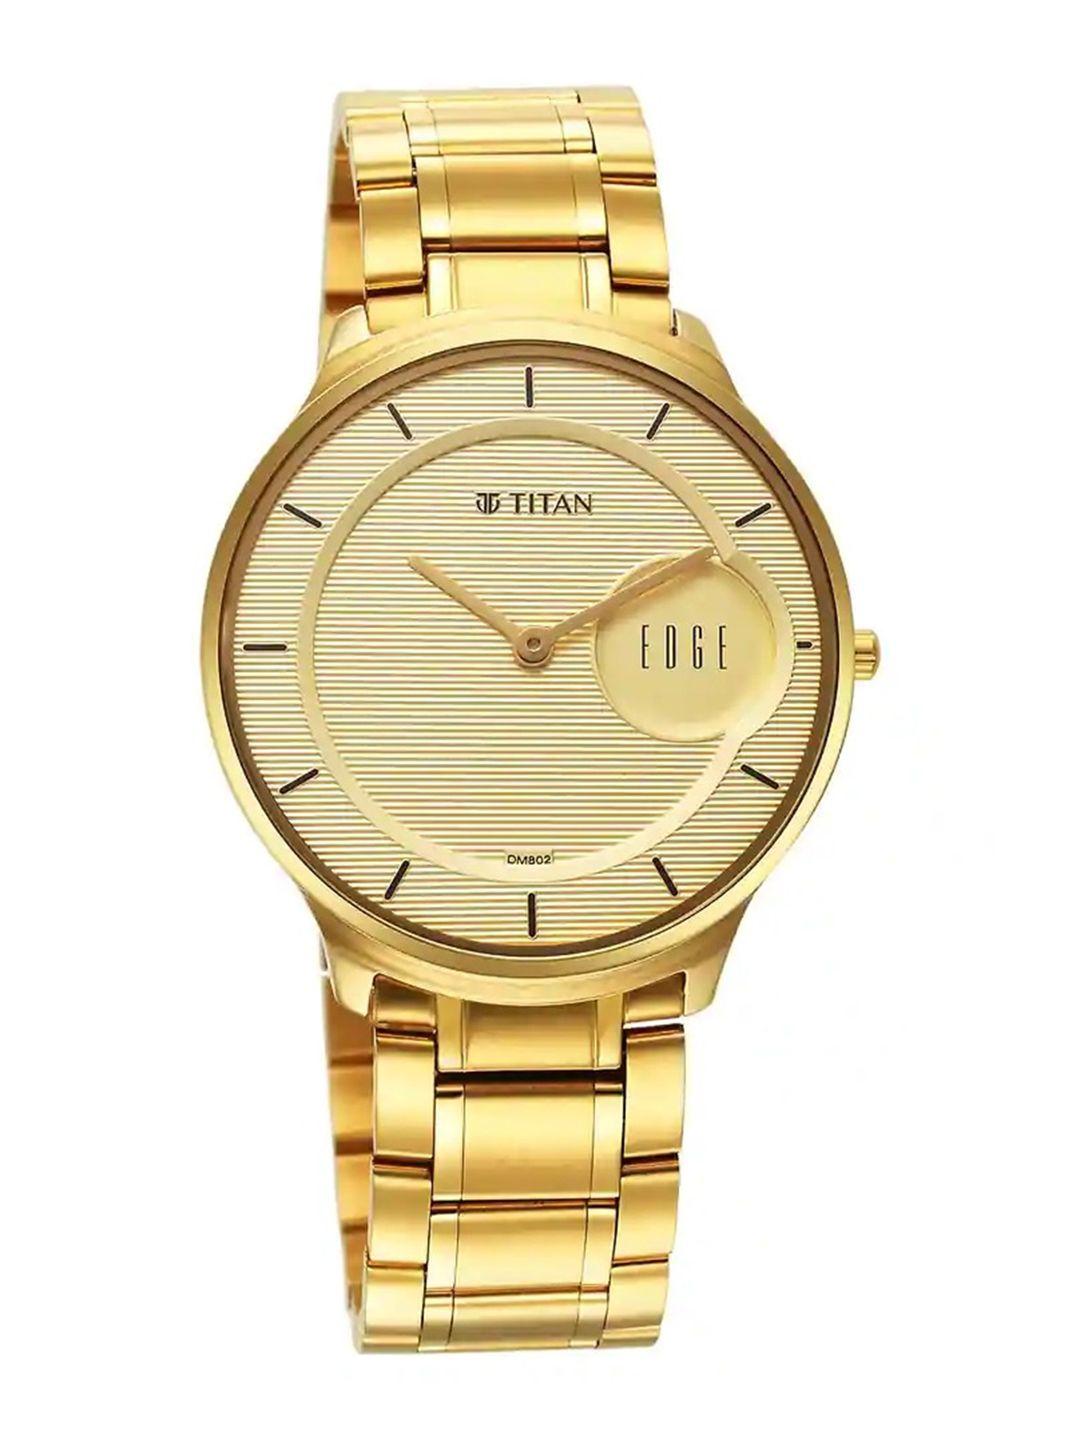 titan men textured dial & bracelet style stainless steel straps analogue watch 1843ym02